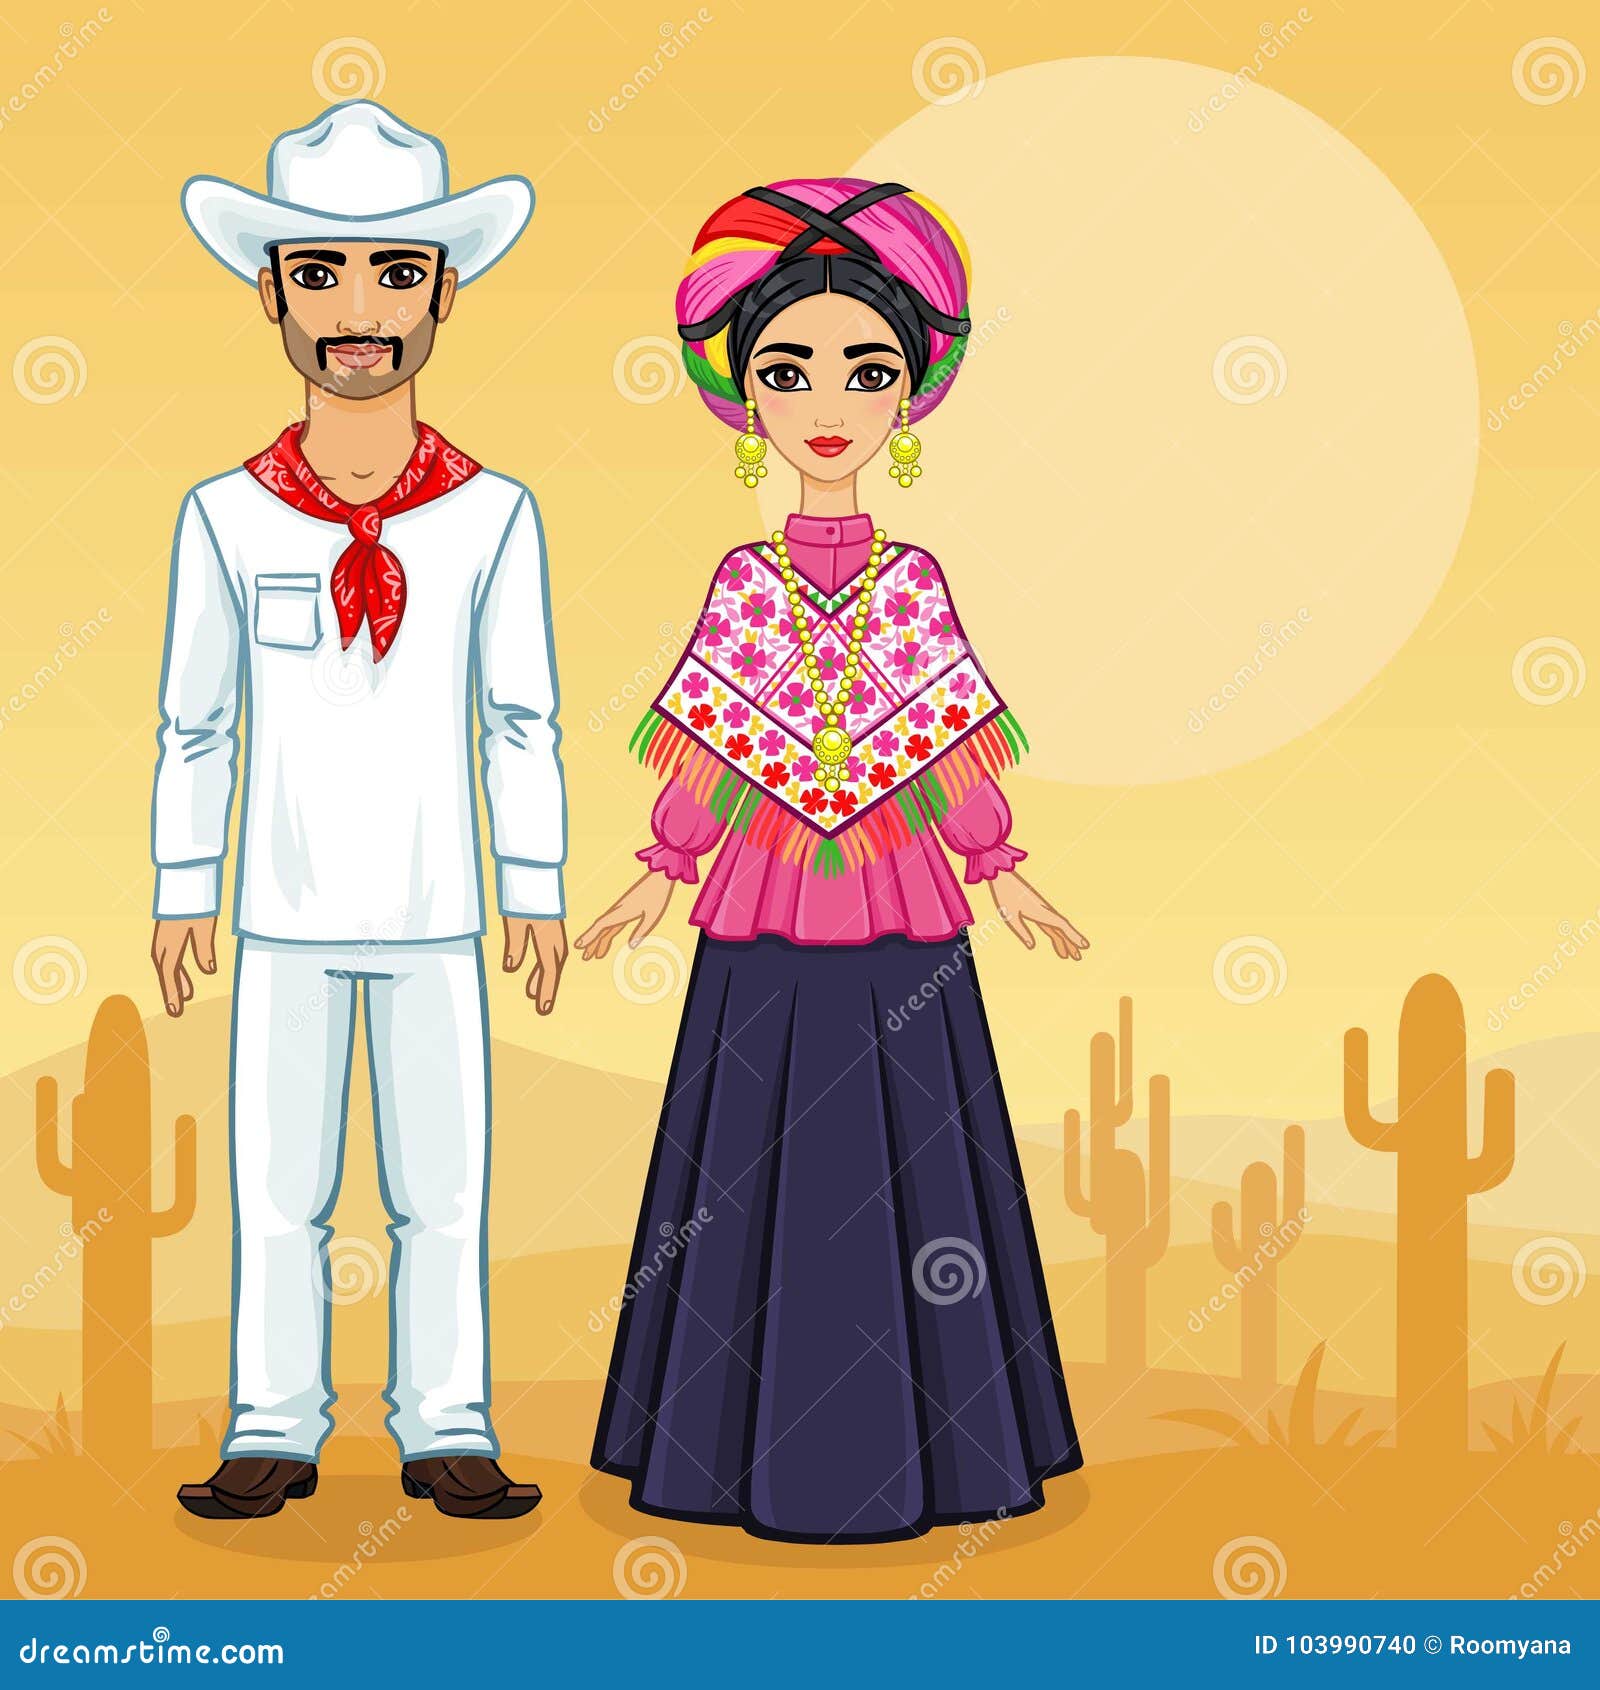 Animation Portrait of the Mexican Family in Ancient Clothes. Full ...